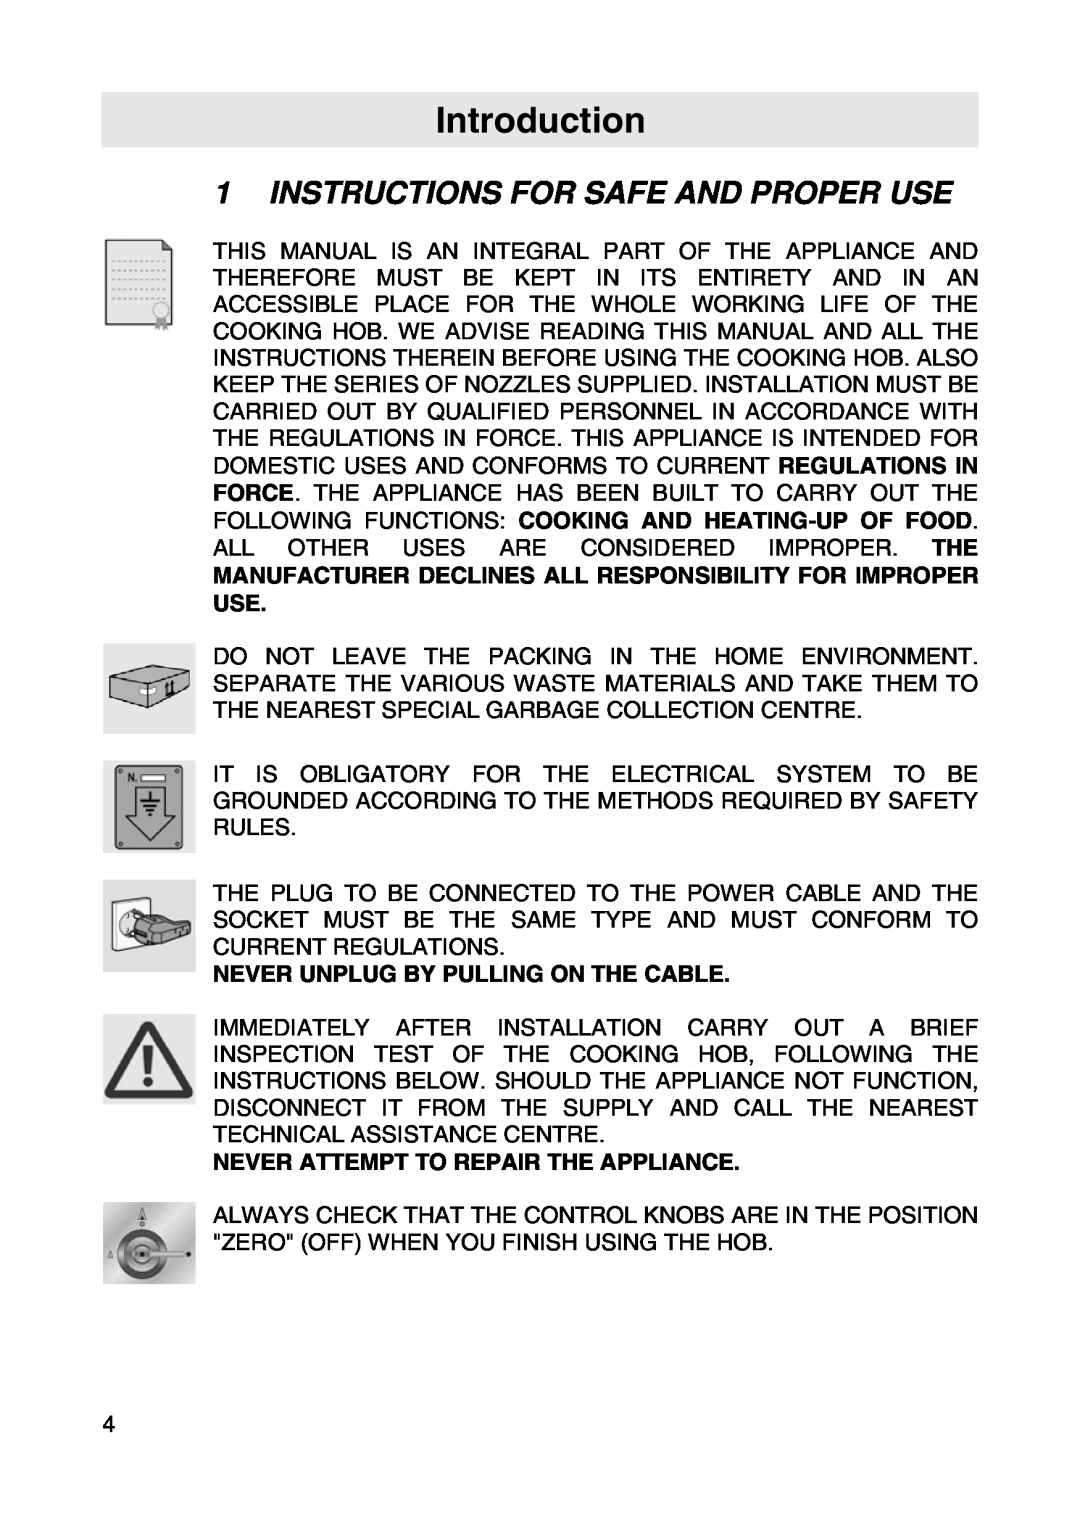 Smeg SER63LPG manual Introduction, Instructions For Safe And Proper Use, Never Unplug By Pulling On The Cable 